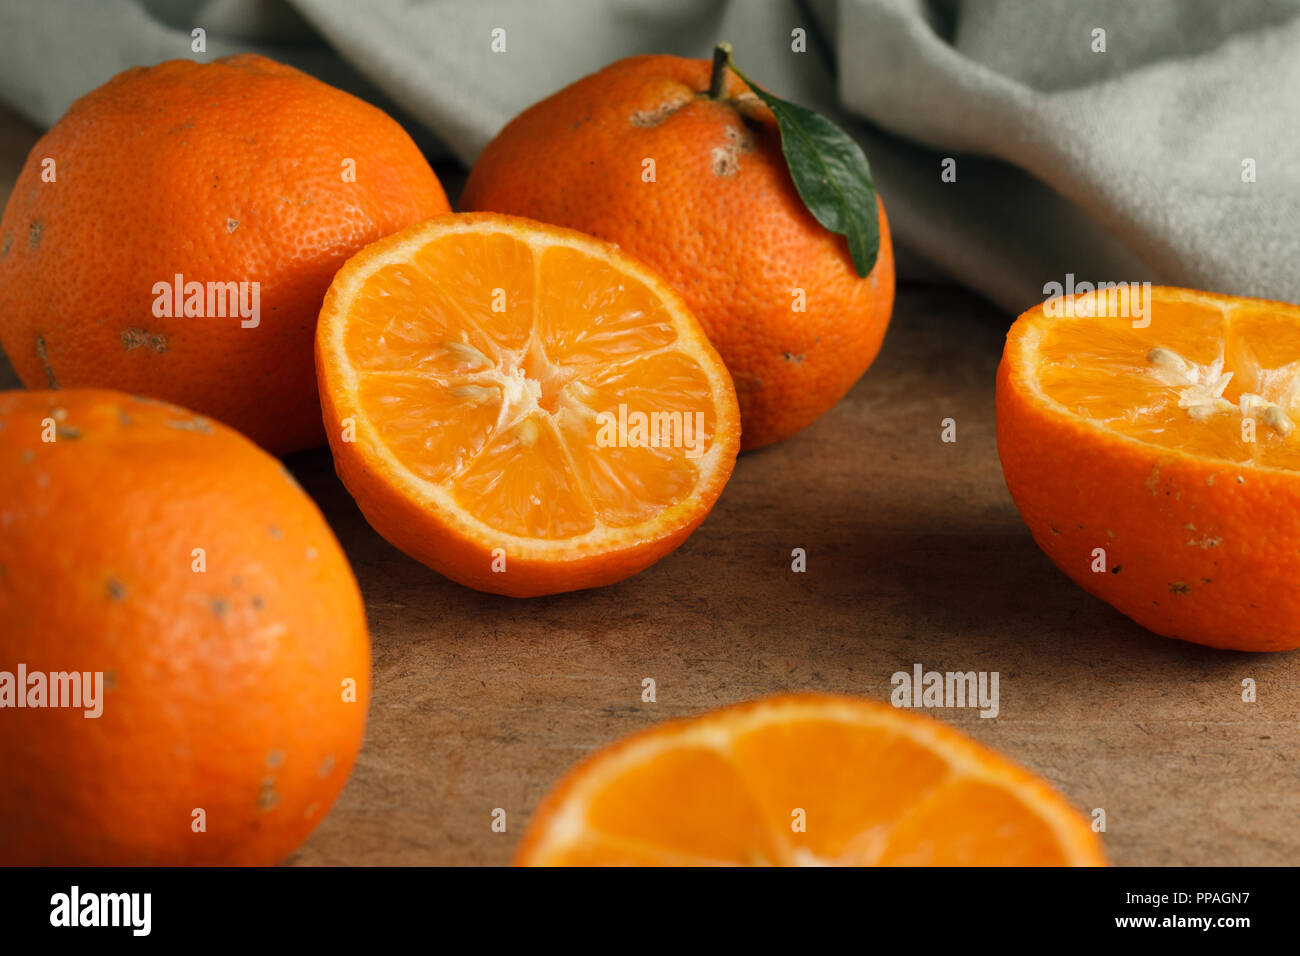 Closeup on a half sliced Rangpur lime surrounded by others; selective focus. Stock Photo